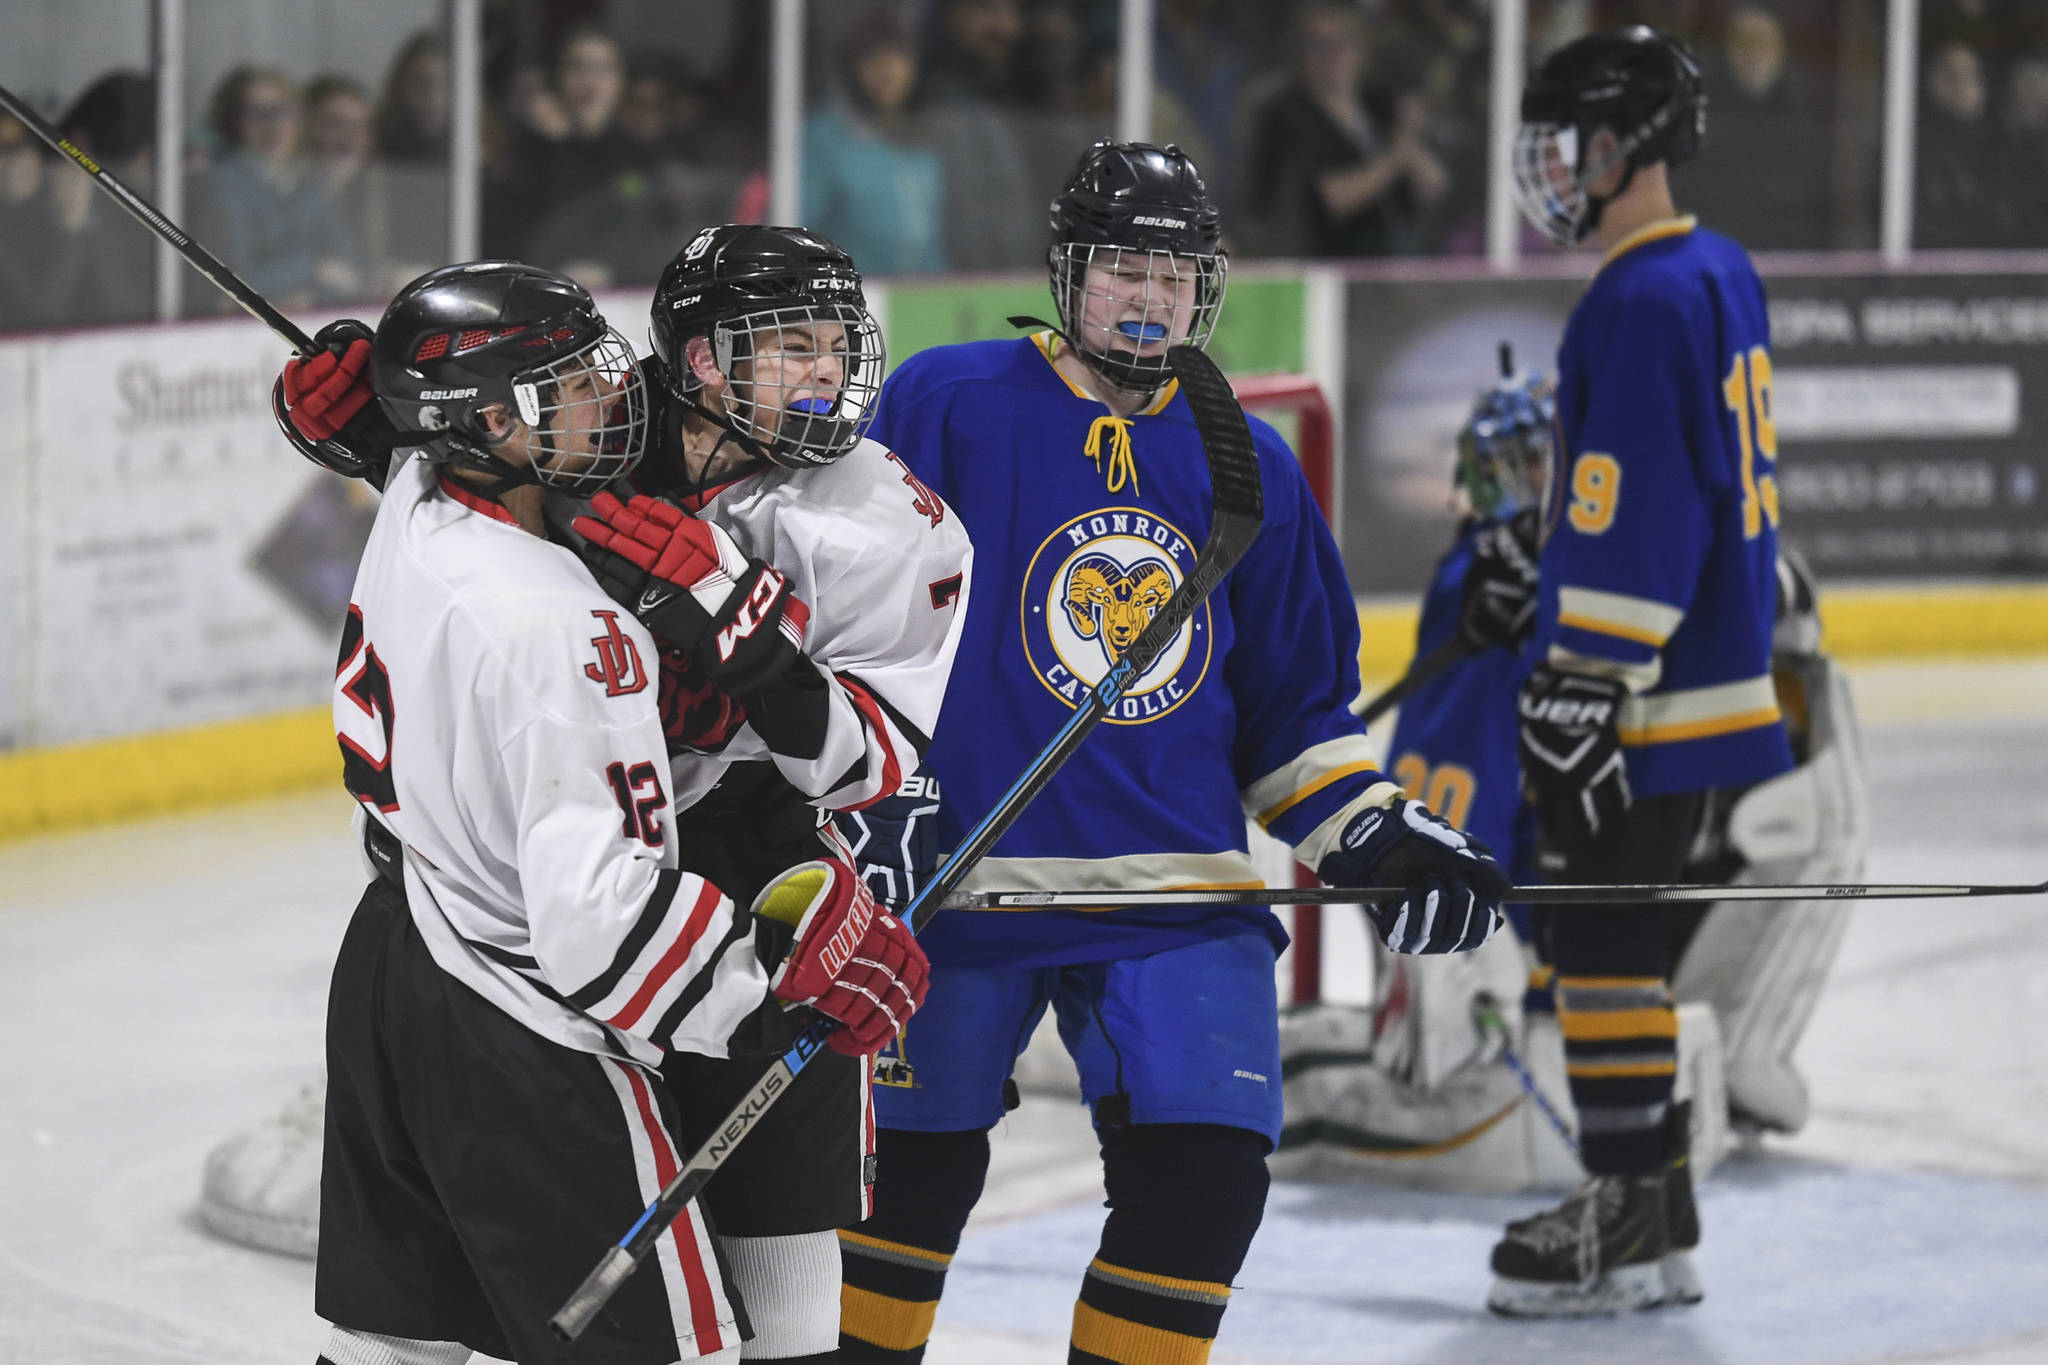 Juneau-Douglas’ Fin Shibler, second from left, celebrates his third period goal with teammate Joey Meier against Monroe Catholic at the Treadwell Arena on Friday, Nov. 15, 2019. JDHS won 13-0. (Michael Penn | Juneau Empire)